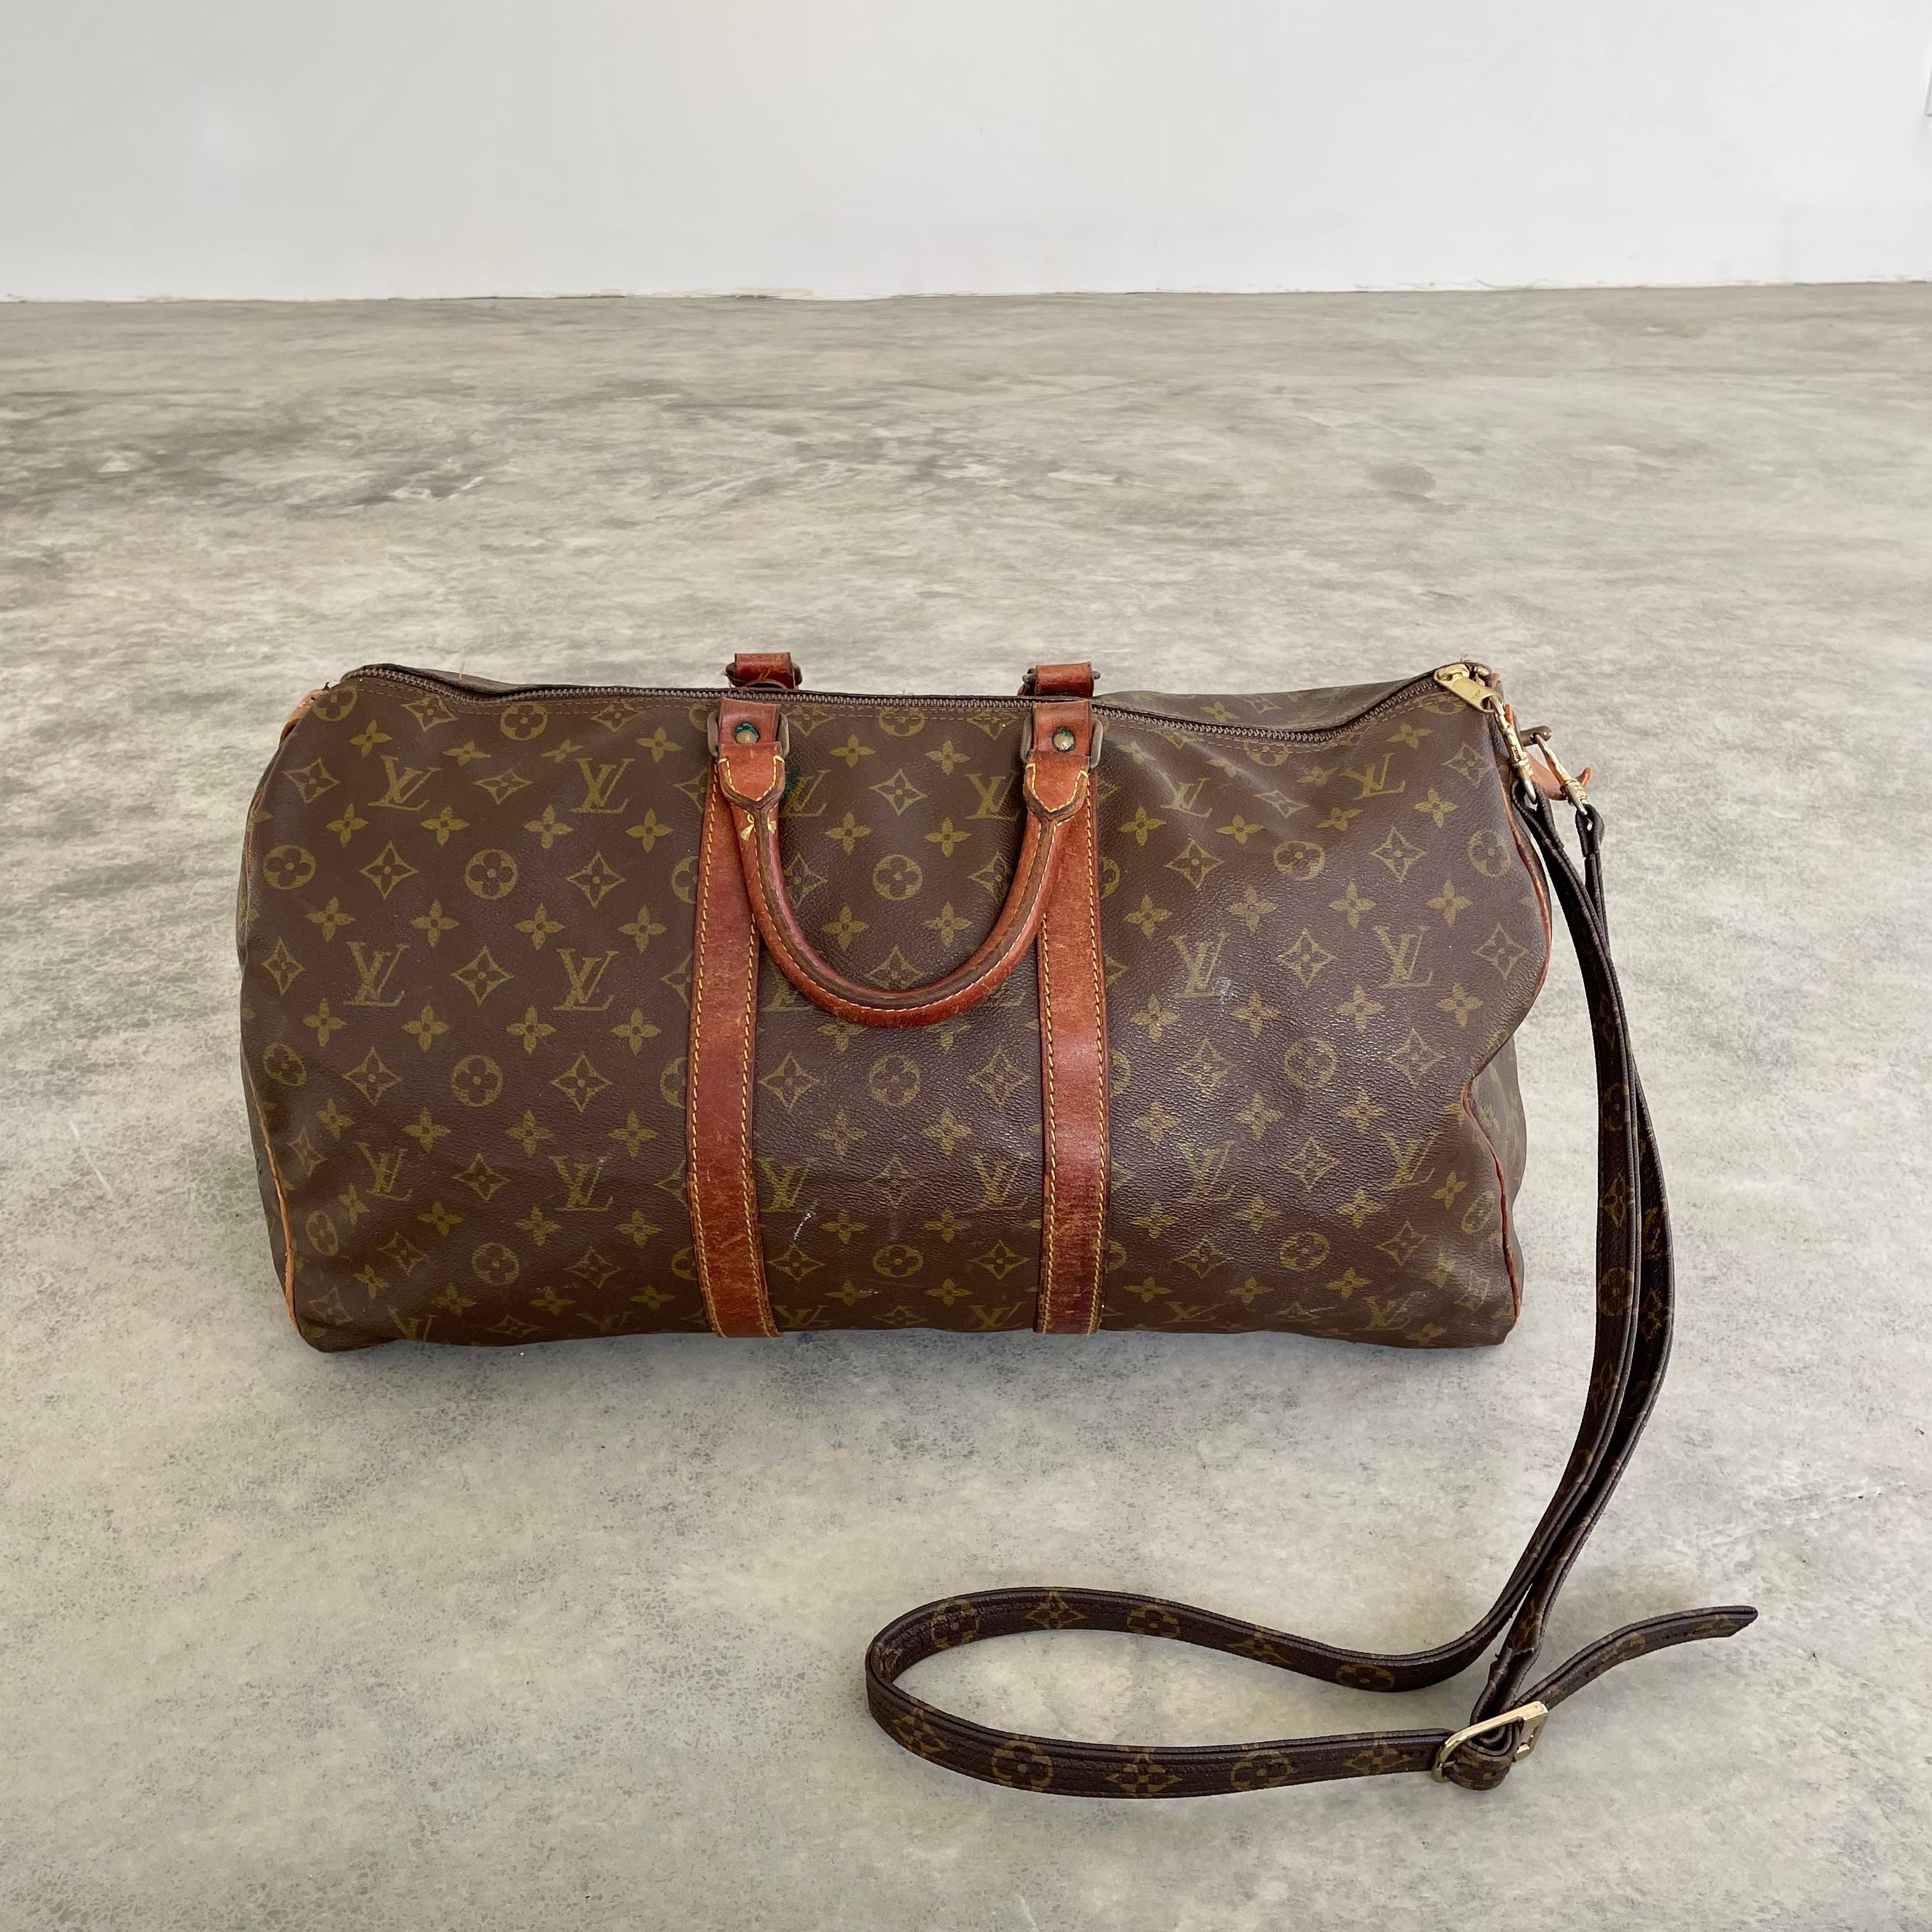 Classic vintage Louis Vuitton 50 cm duffle bag. Perfect for weekend trips, this LV monogram print duffle is made with saddle leather and brass hardware and wrapped in the iconic Louis Vuitton canvas. Timeless simplicity in design and iconic badging